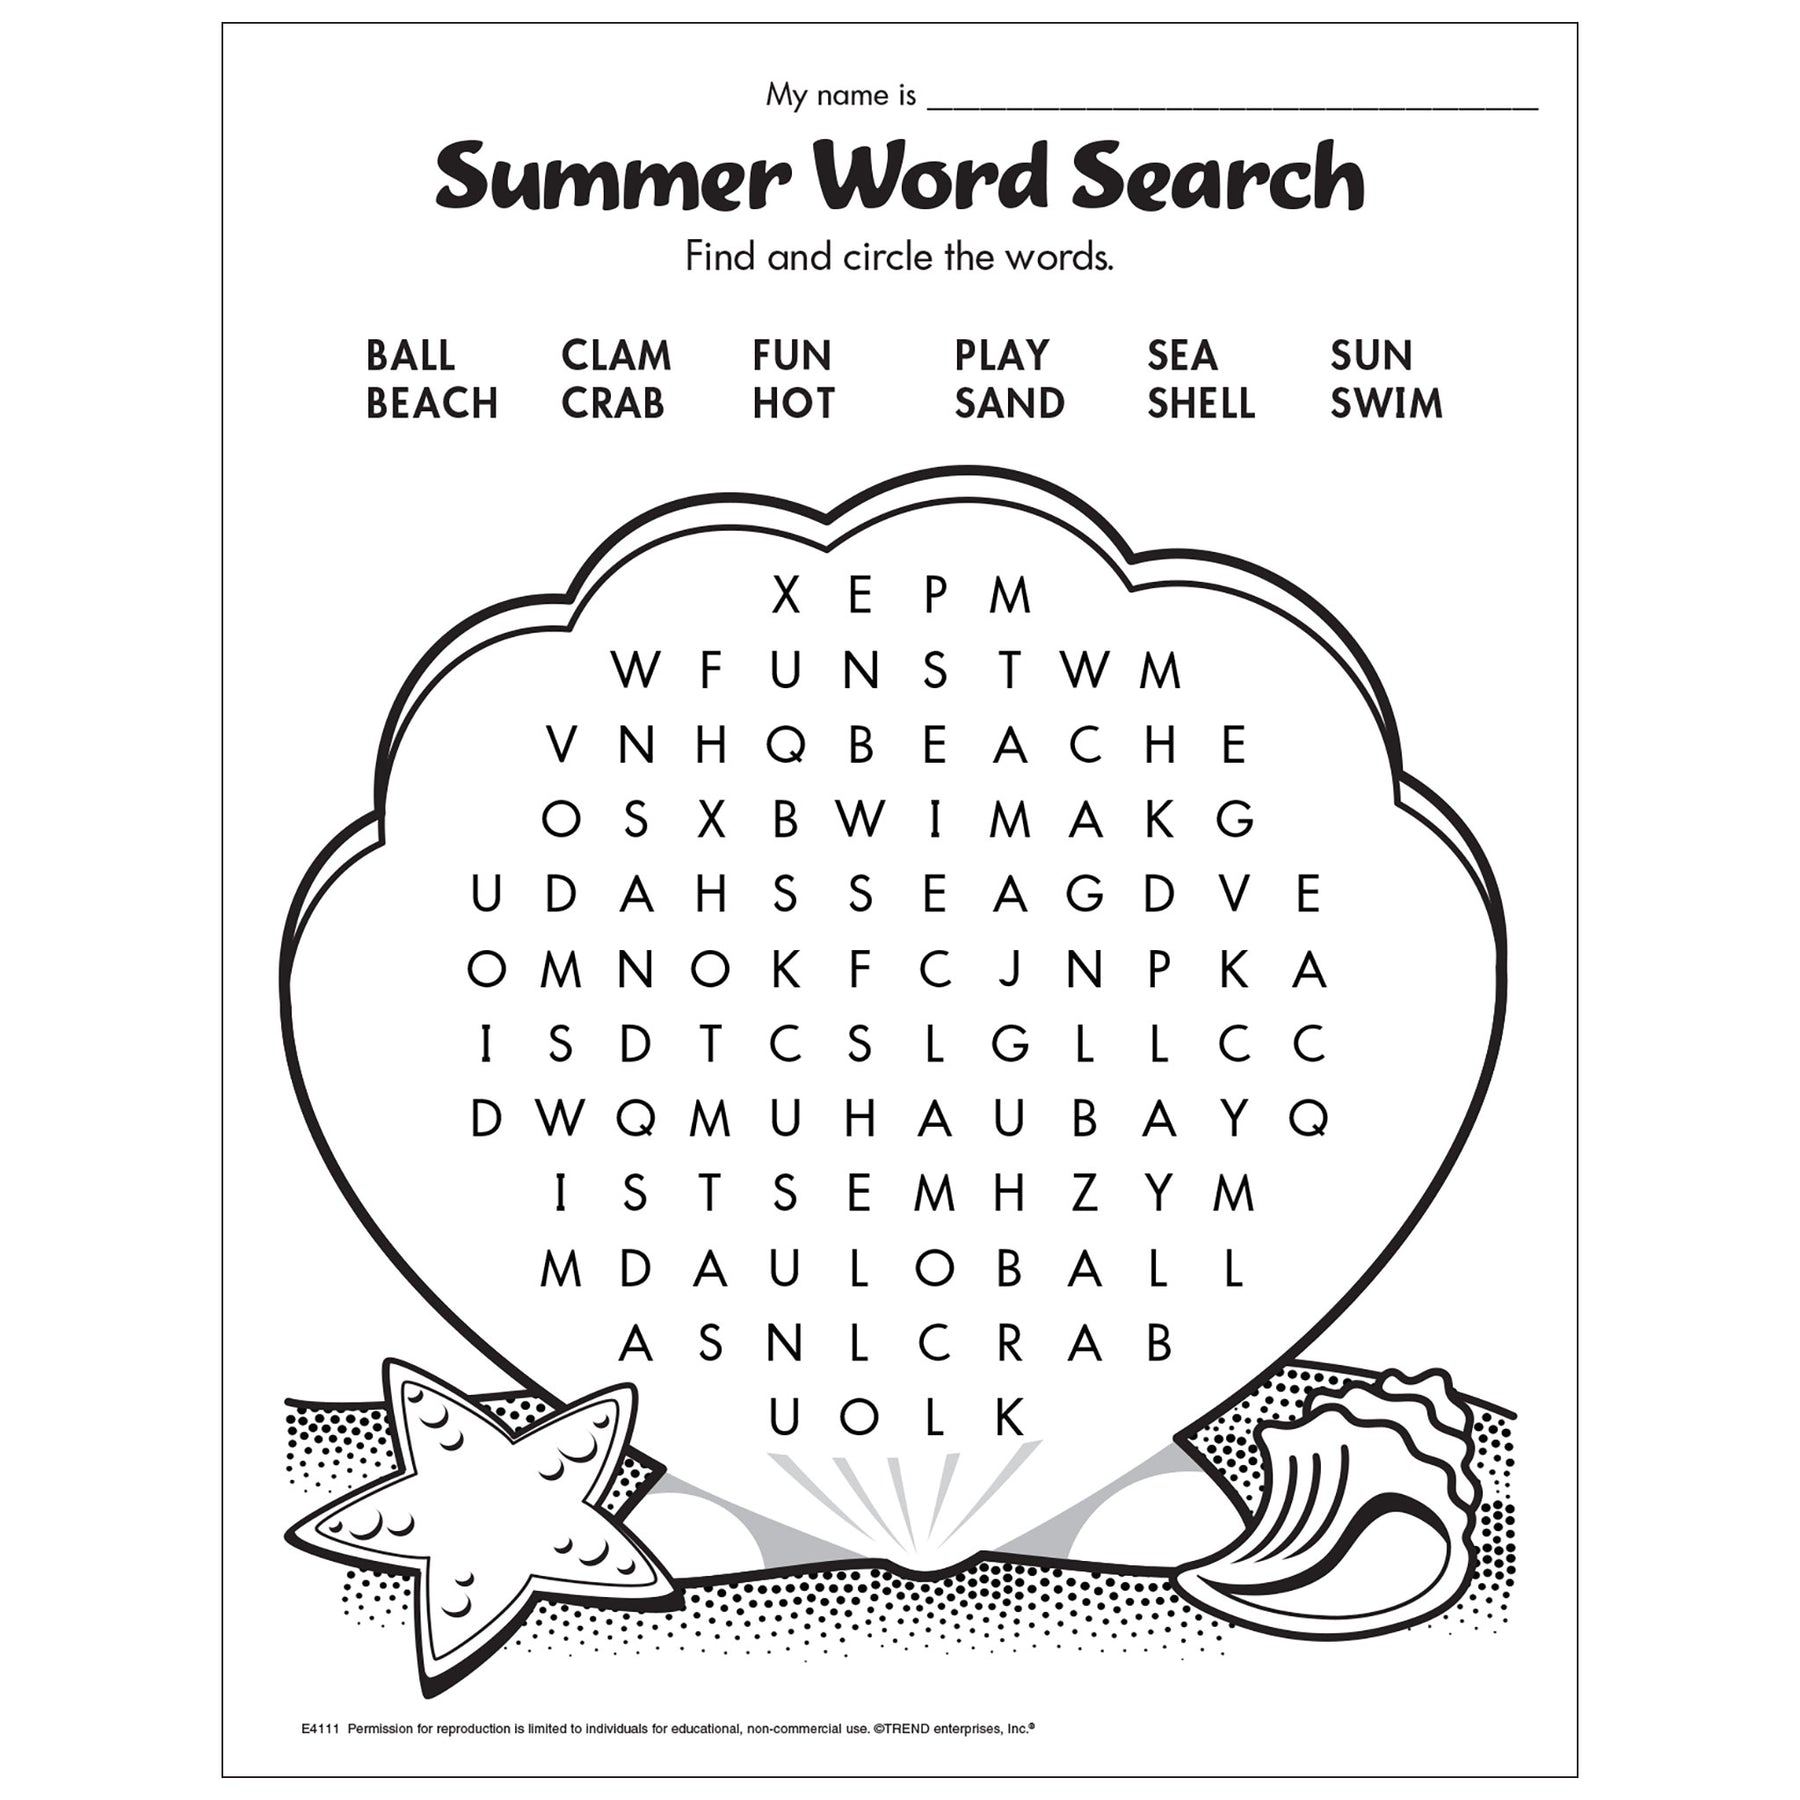 printable-word-searches-easy-summer-word-search-printable-puzzles